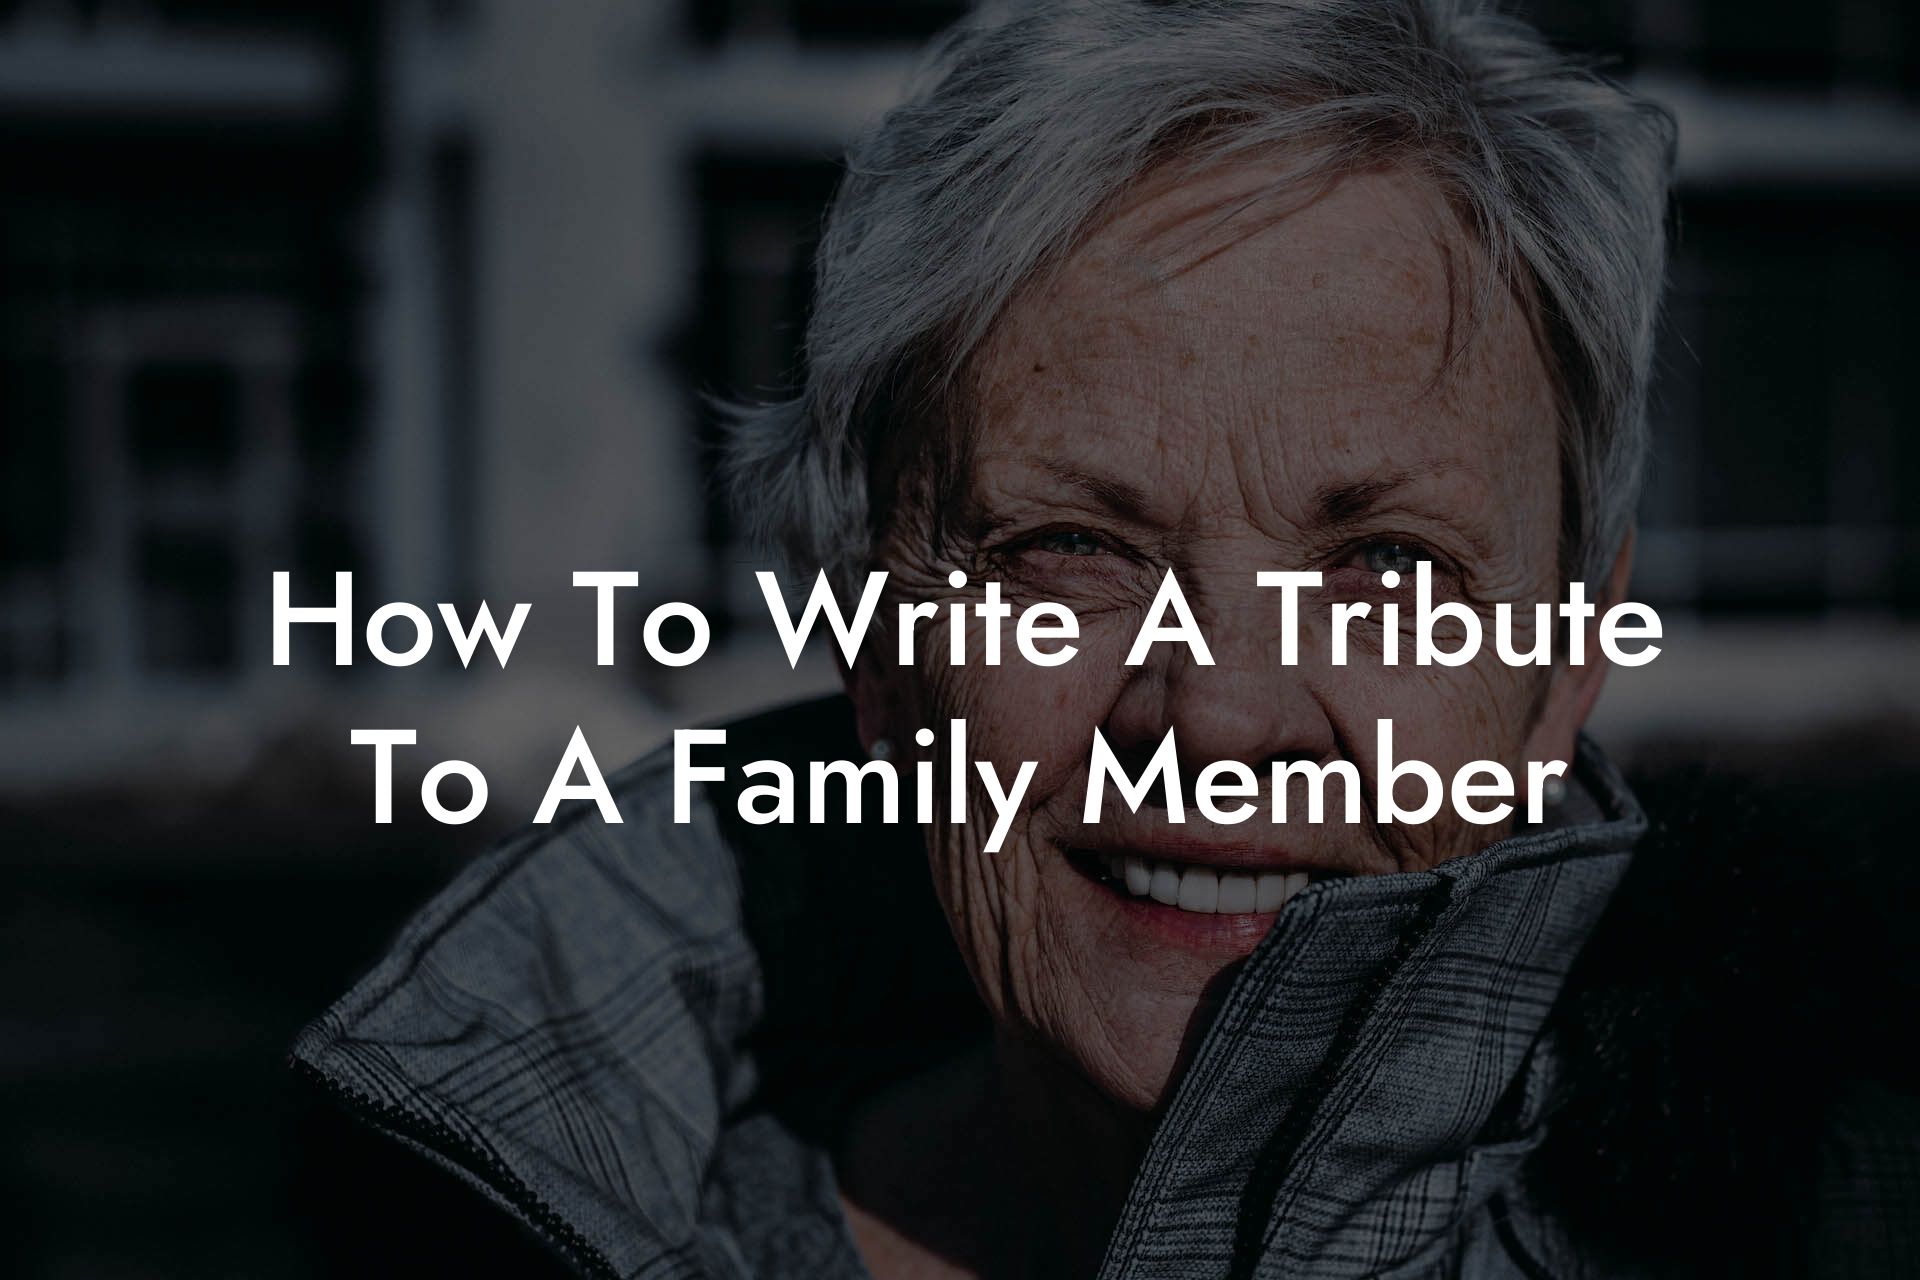 How To Write A Tribute To A Family Member